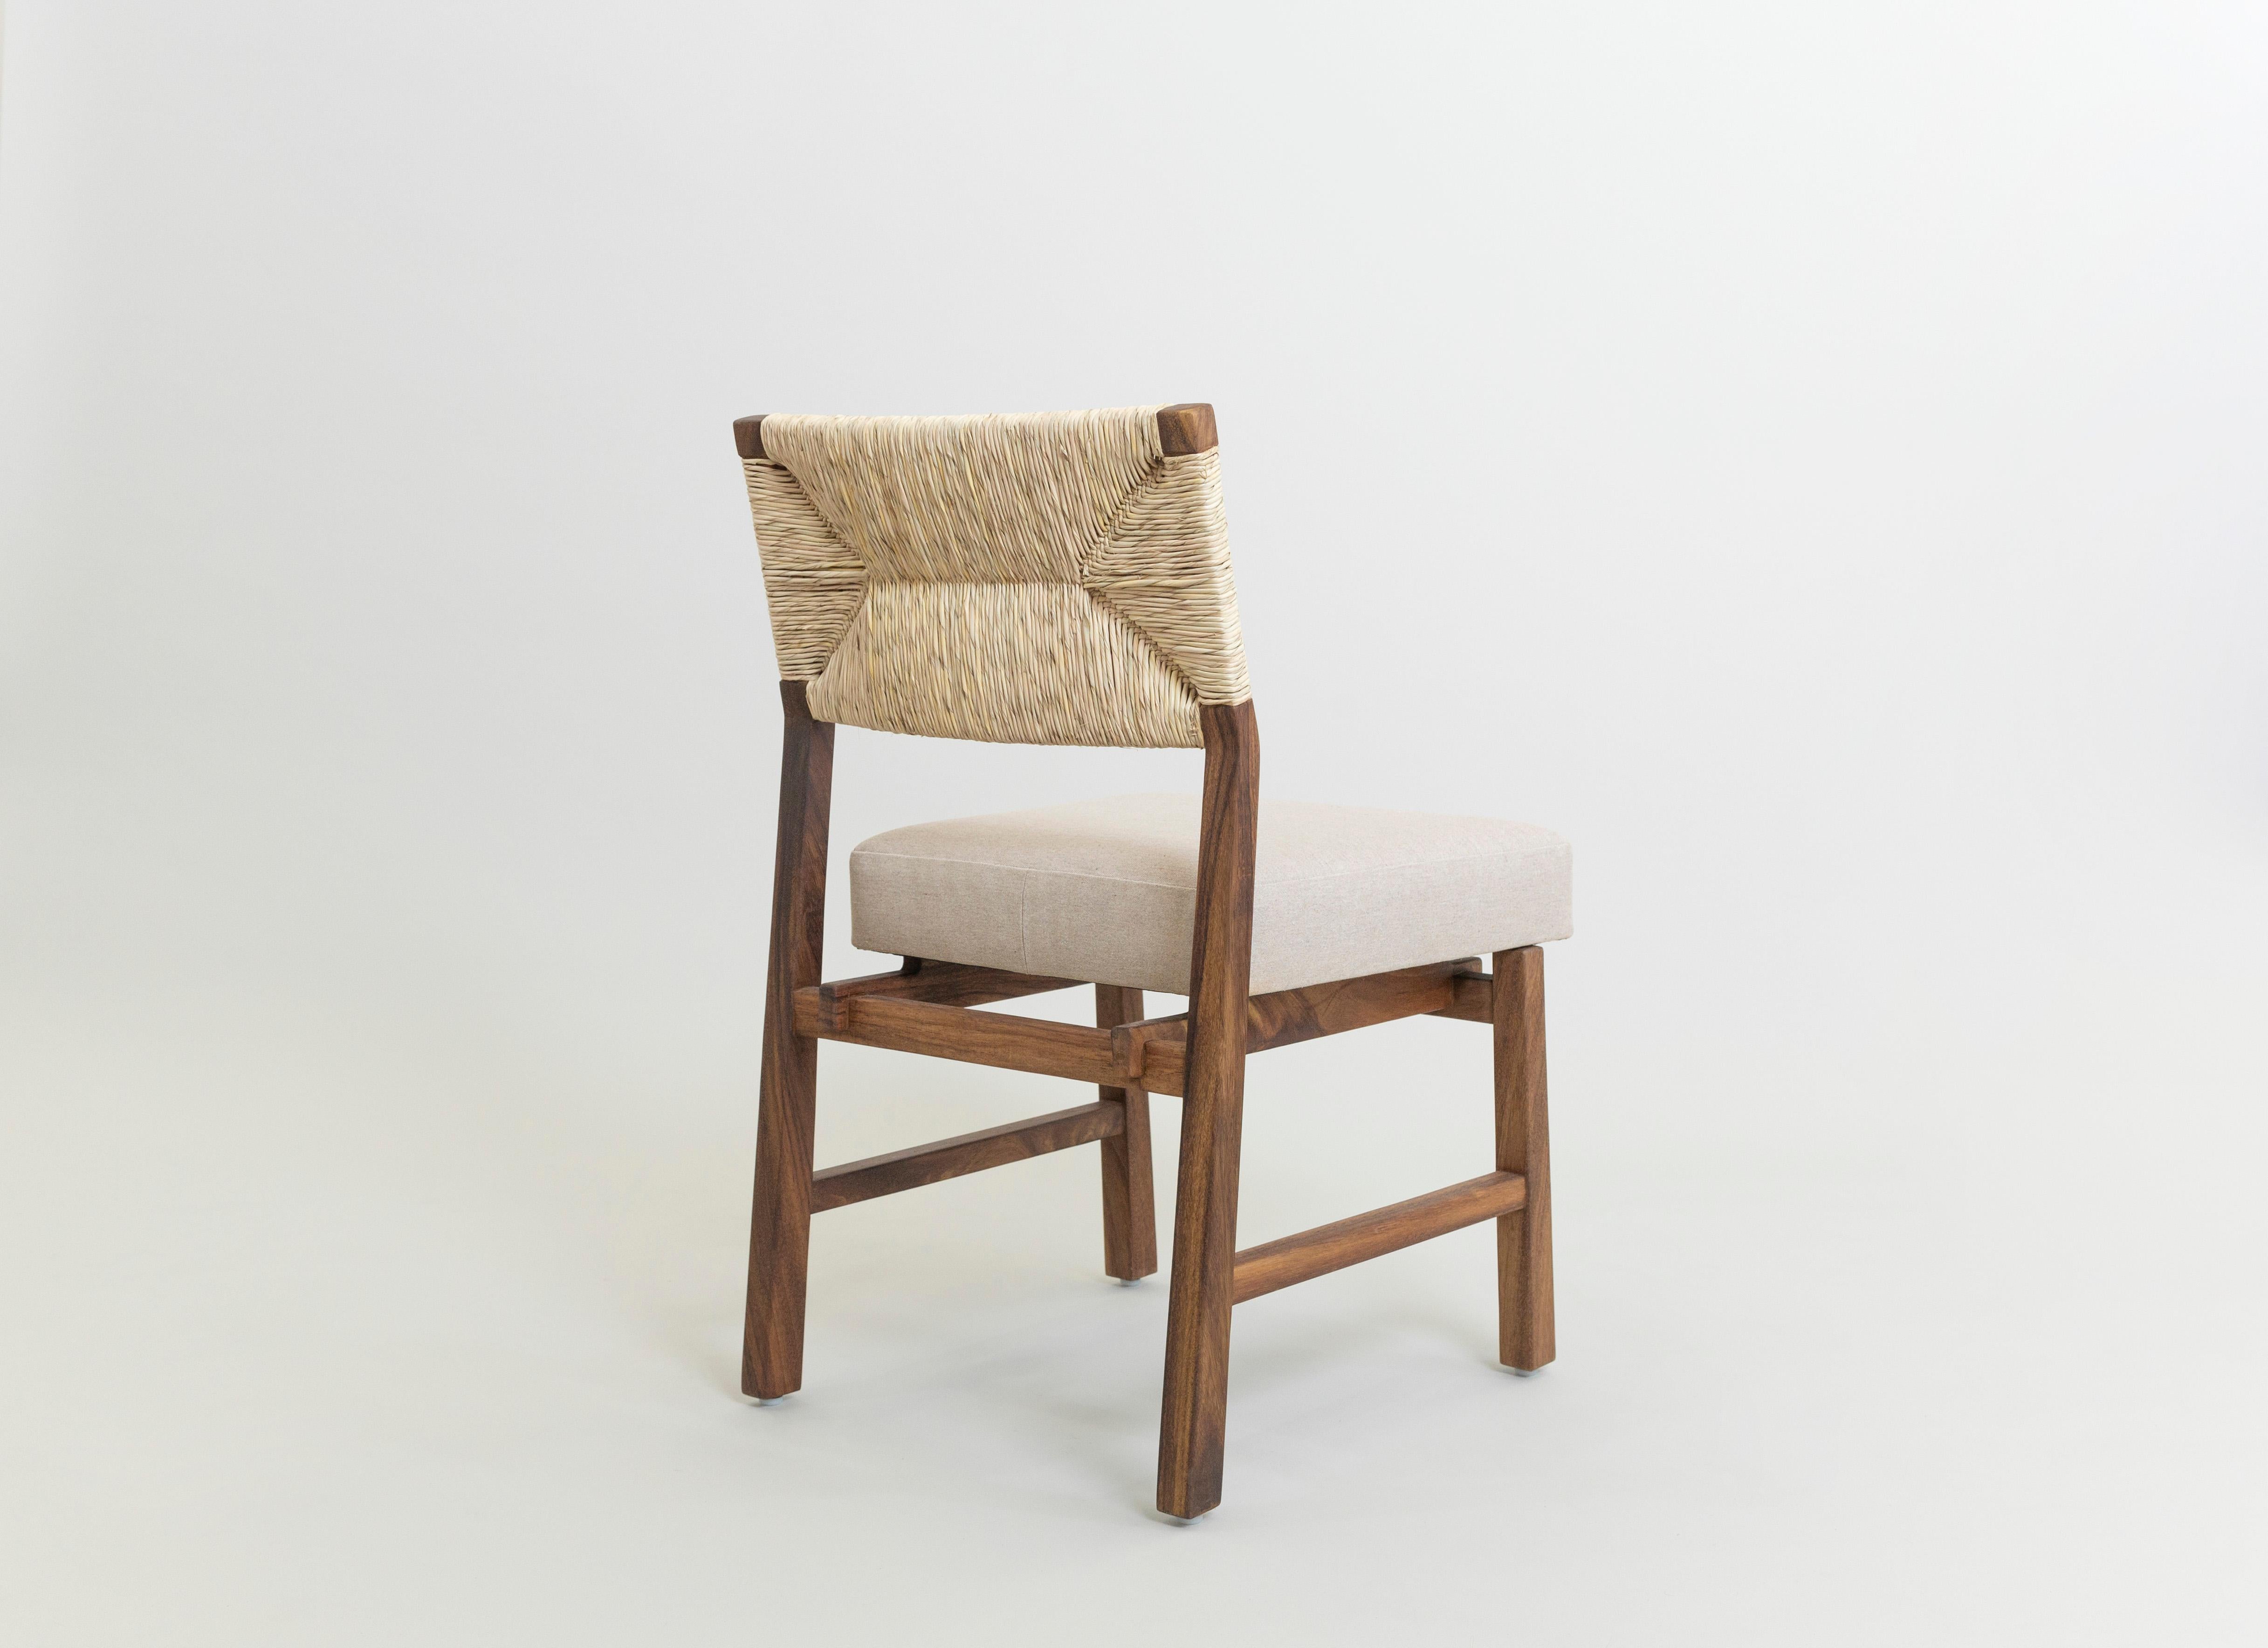 This Classic design has a modern flourish without overshadowing the handcrafted details from the Natural Palm woven back that makes it so unique. The Lago dining chair is made of solid Huanacaxtle, a tropical hardwood from southern Mexico. seat com